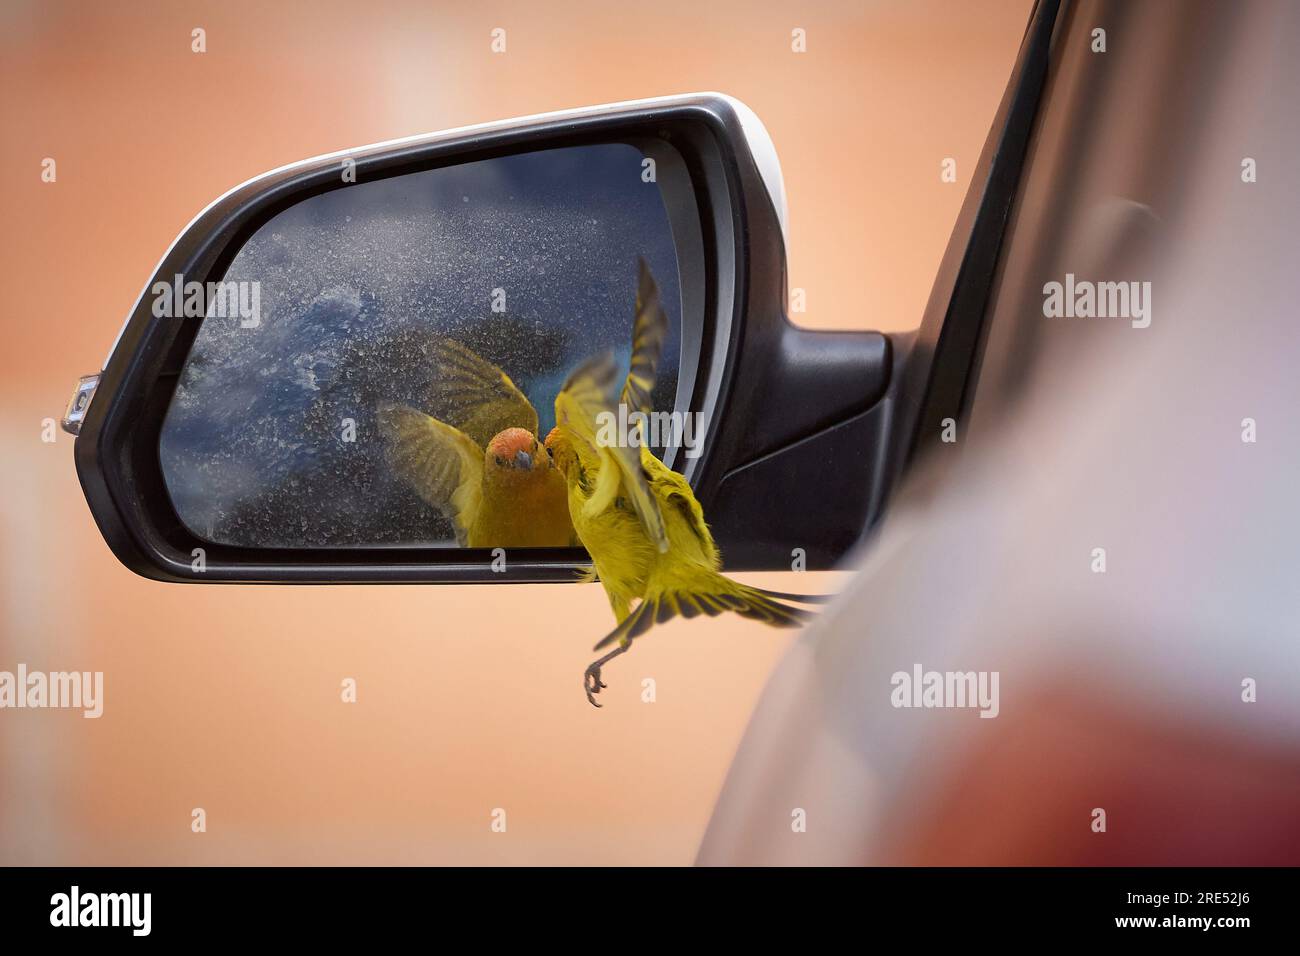 https://c8.alamy.com/comp/2RE52J6/a-canary-bird-is-seen-bumping-into-a-cars-side-mirror-while-interacting-with-its-own-reflection-in-franca-sao-paulo-brazil-on-july-25-2023-photo-by-igor-do-valesipa-usa-2RE52J6.jpg